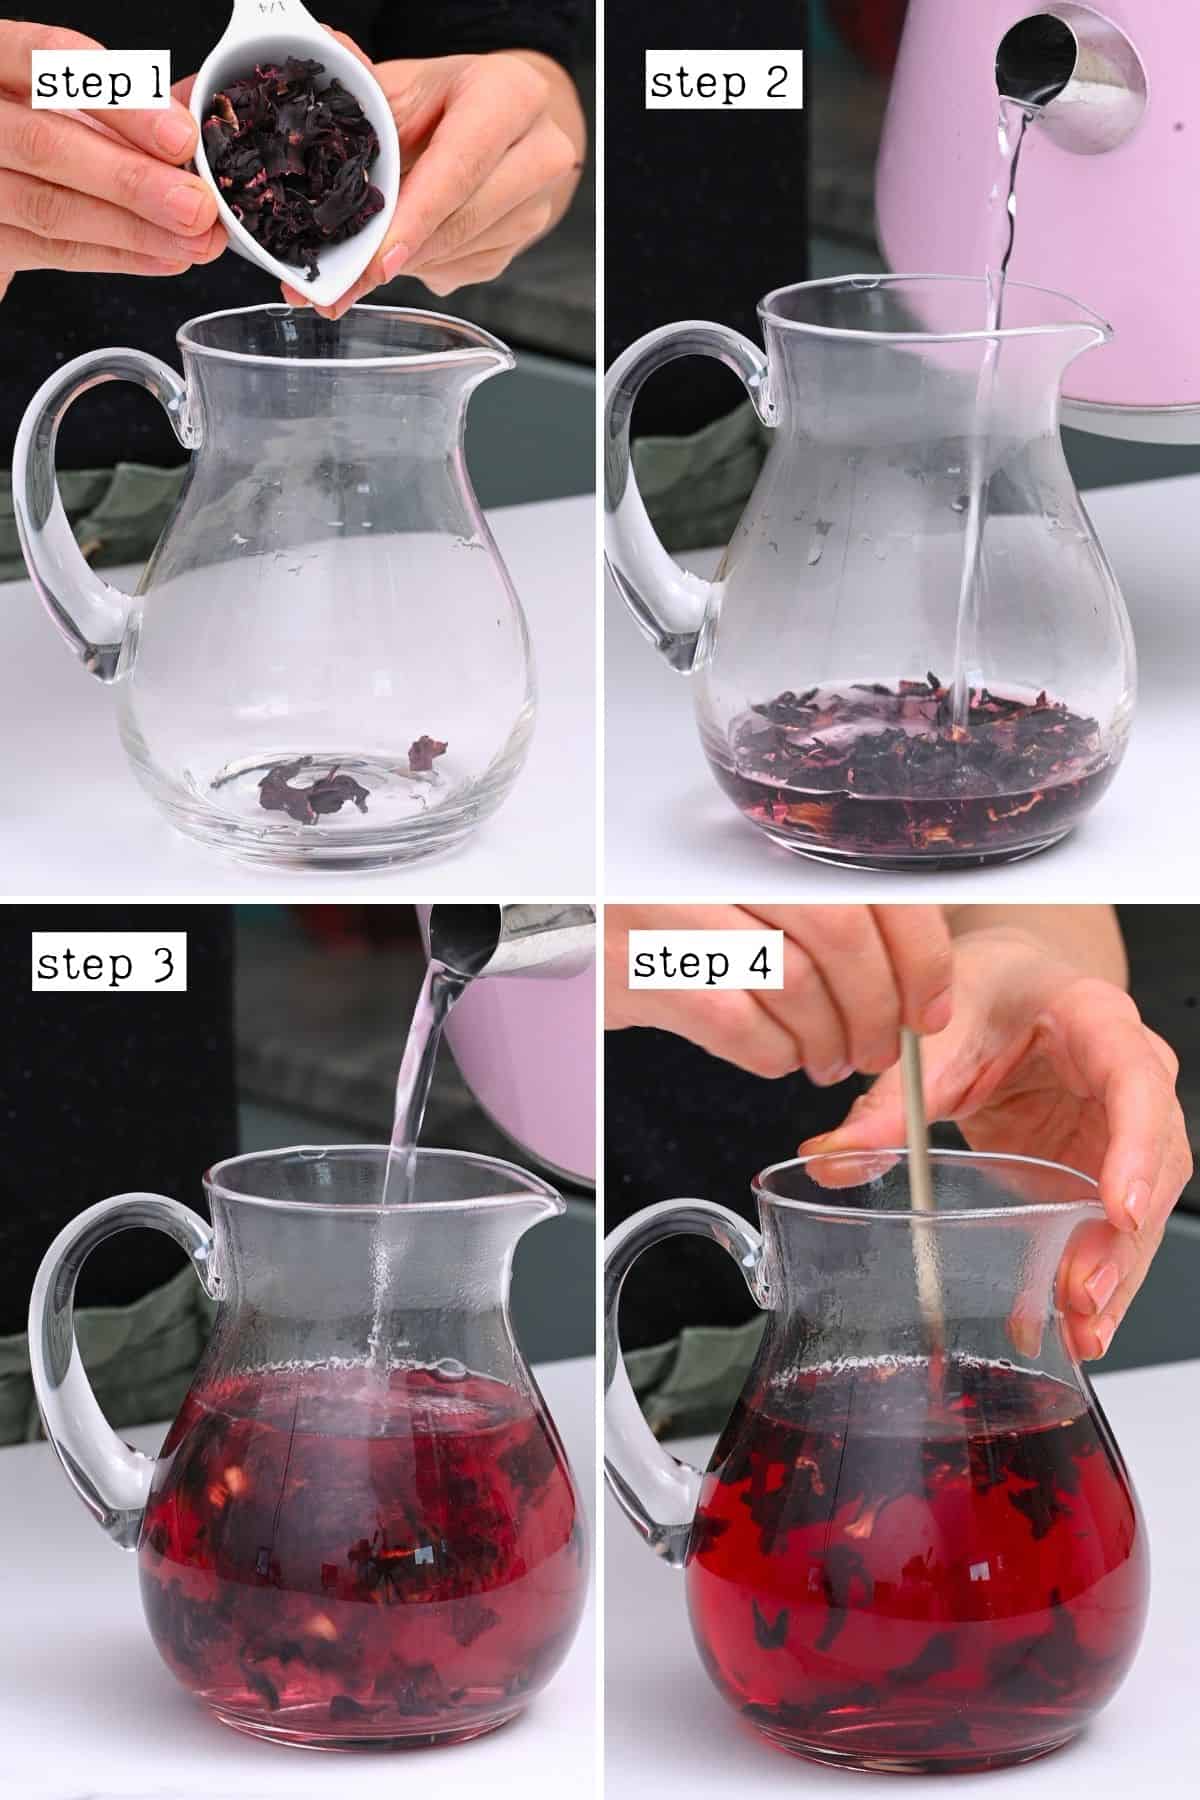 Steps for making hibiscus tea